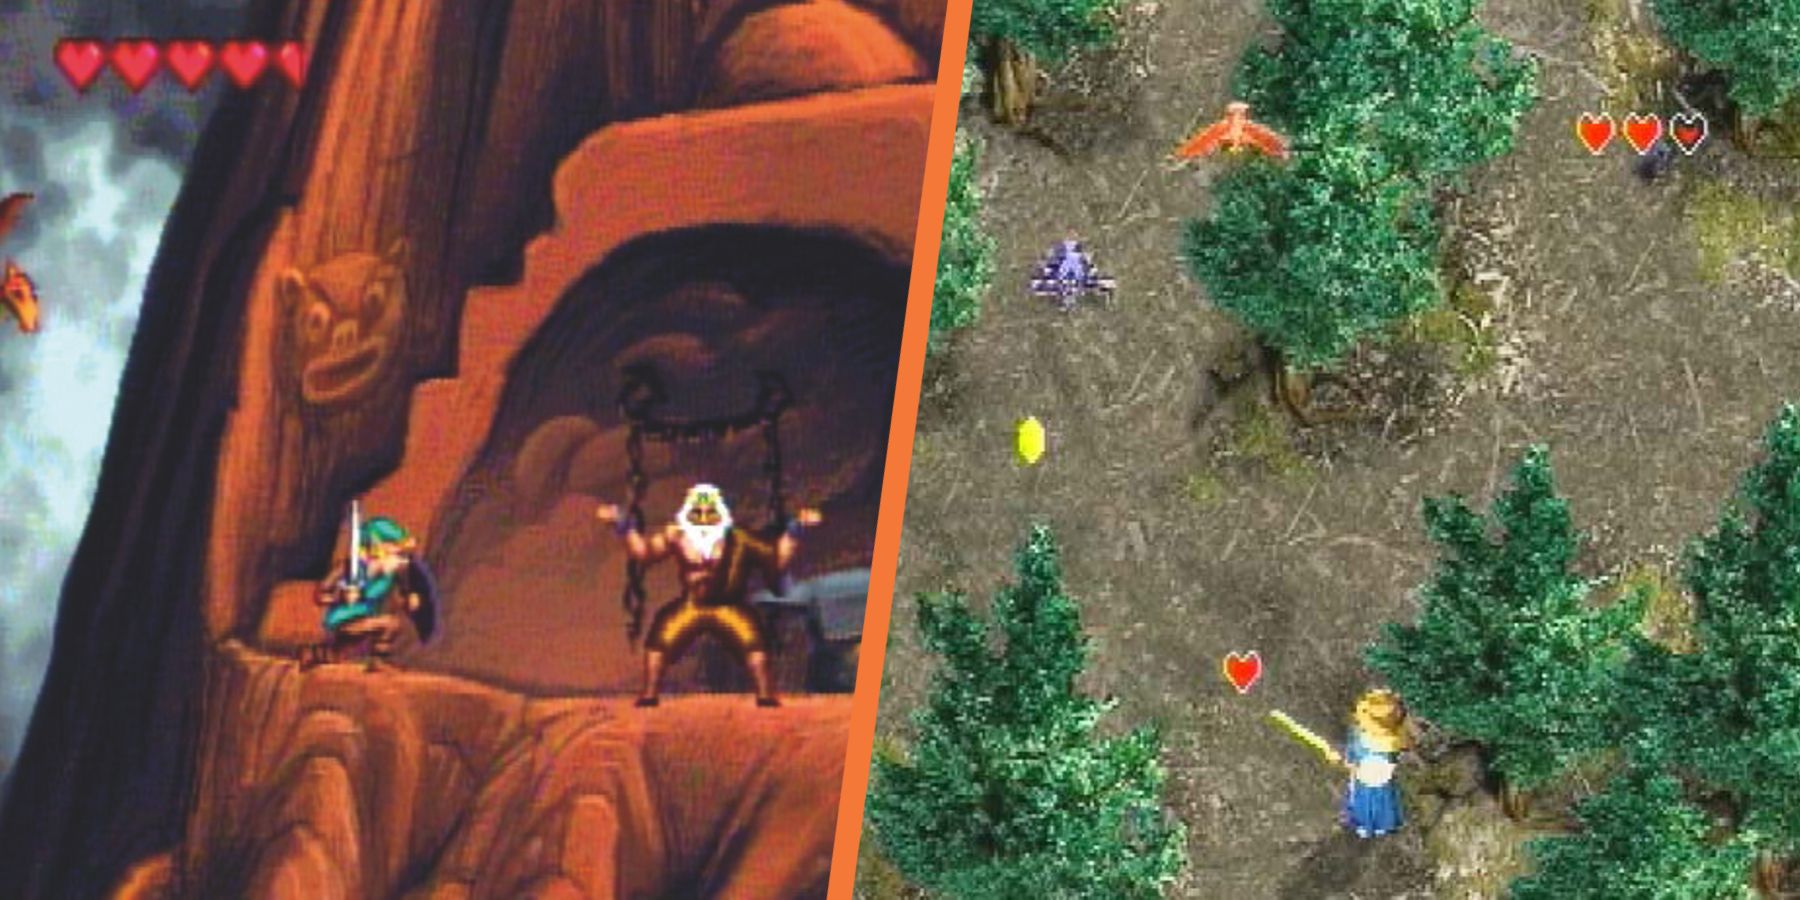 Two stills from Legend of Zelda: The Faces of Evil and Zelda's Adventure showing their respective gameplay.